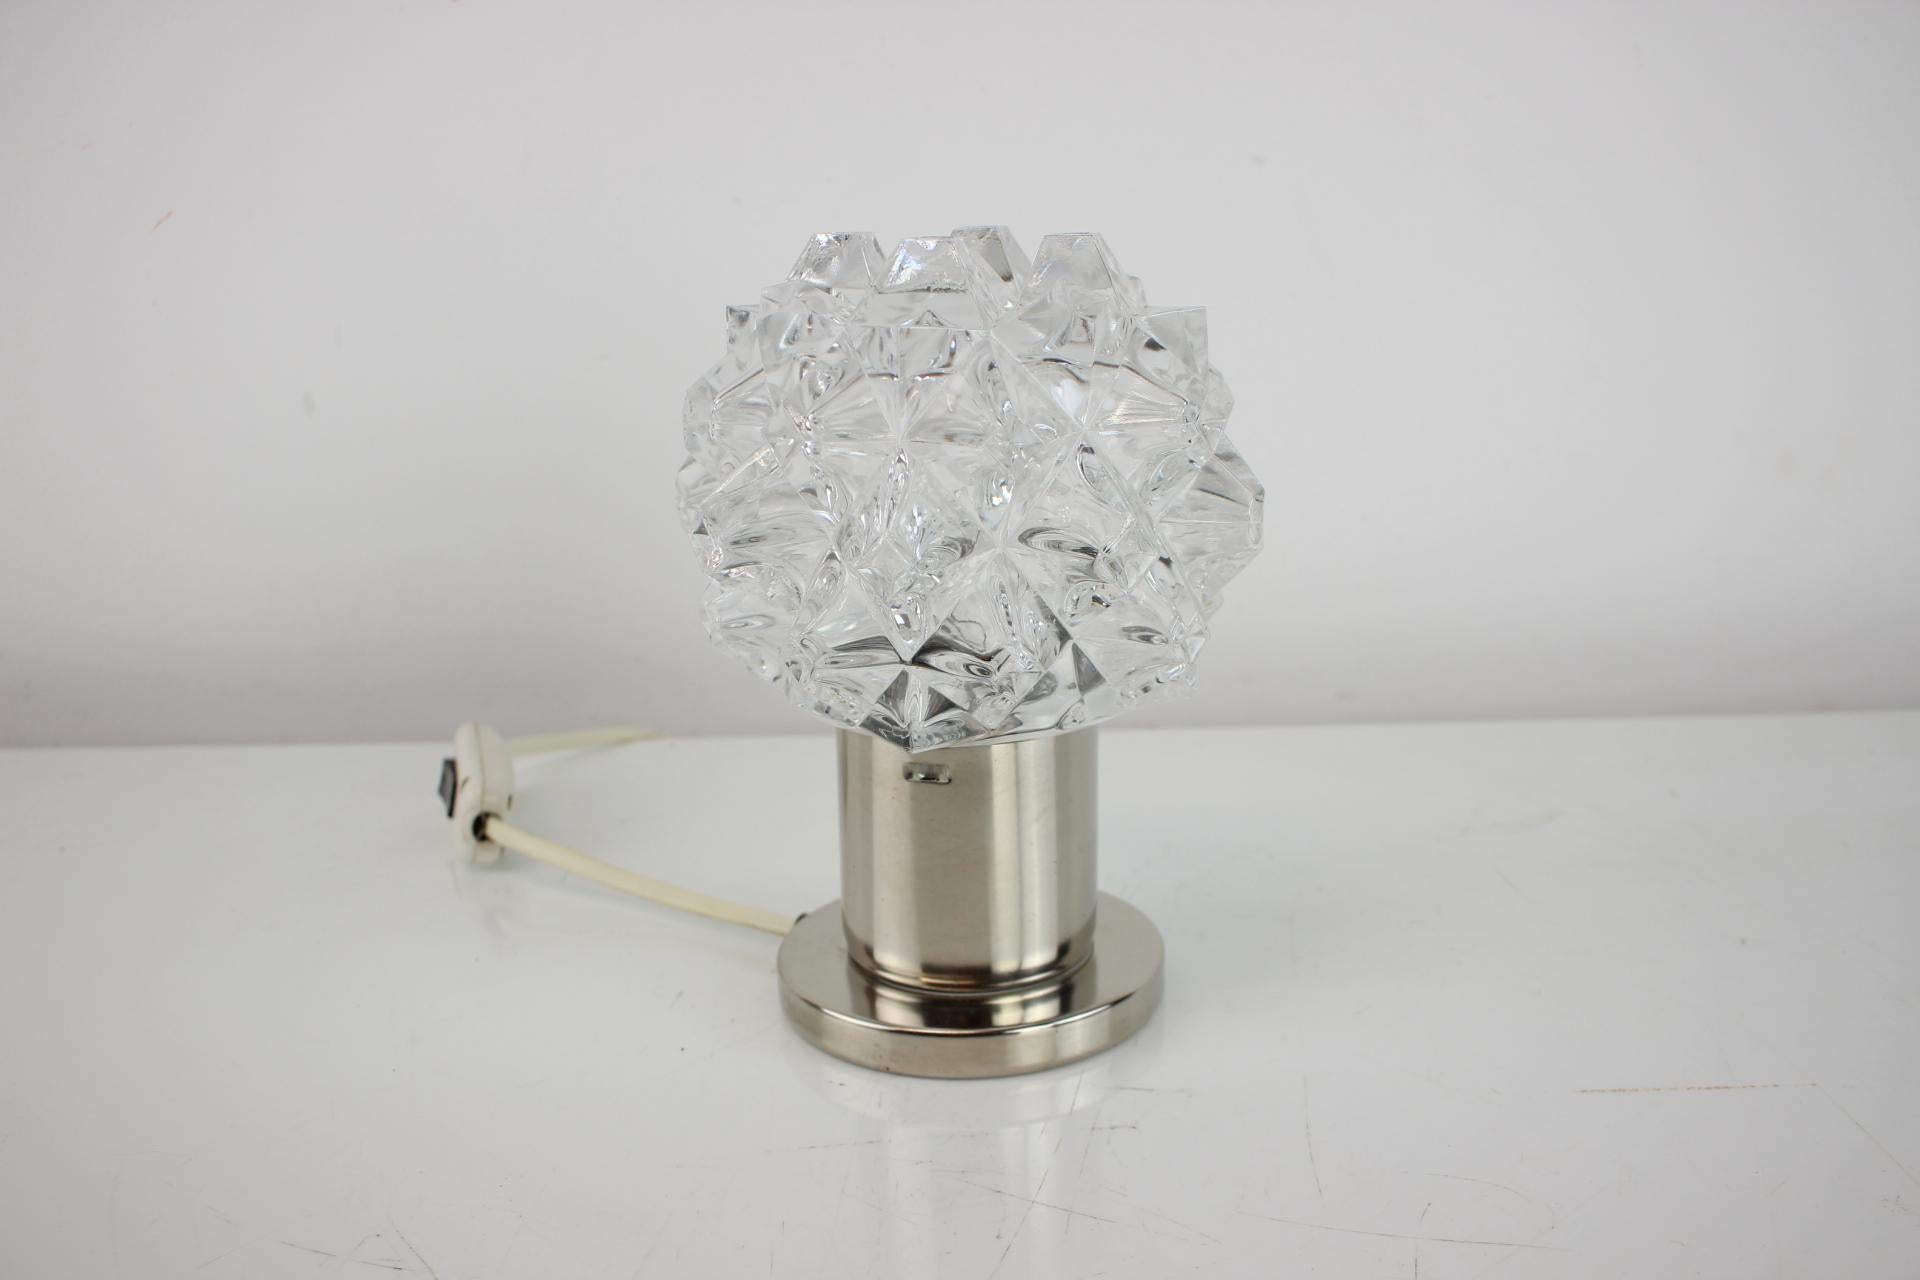 Vintage  table lamp or bedside lamp. Can also be used as wall lamp. Produced by famous Kamenicky Senov Glassworks in former Czechoslovakia in the 1960s. 
Bulb: 1 x E14. US plug adapter included.